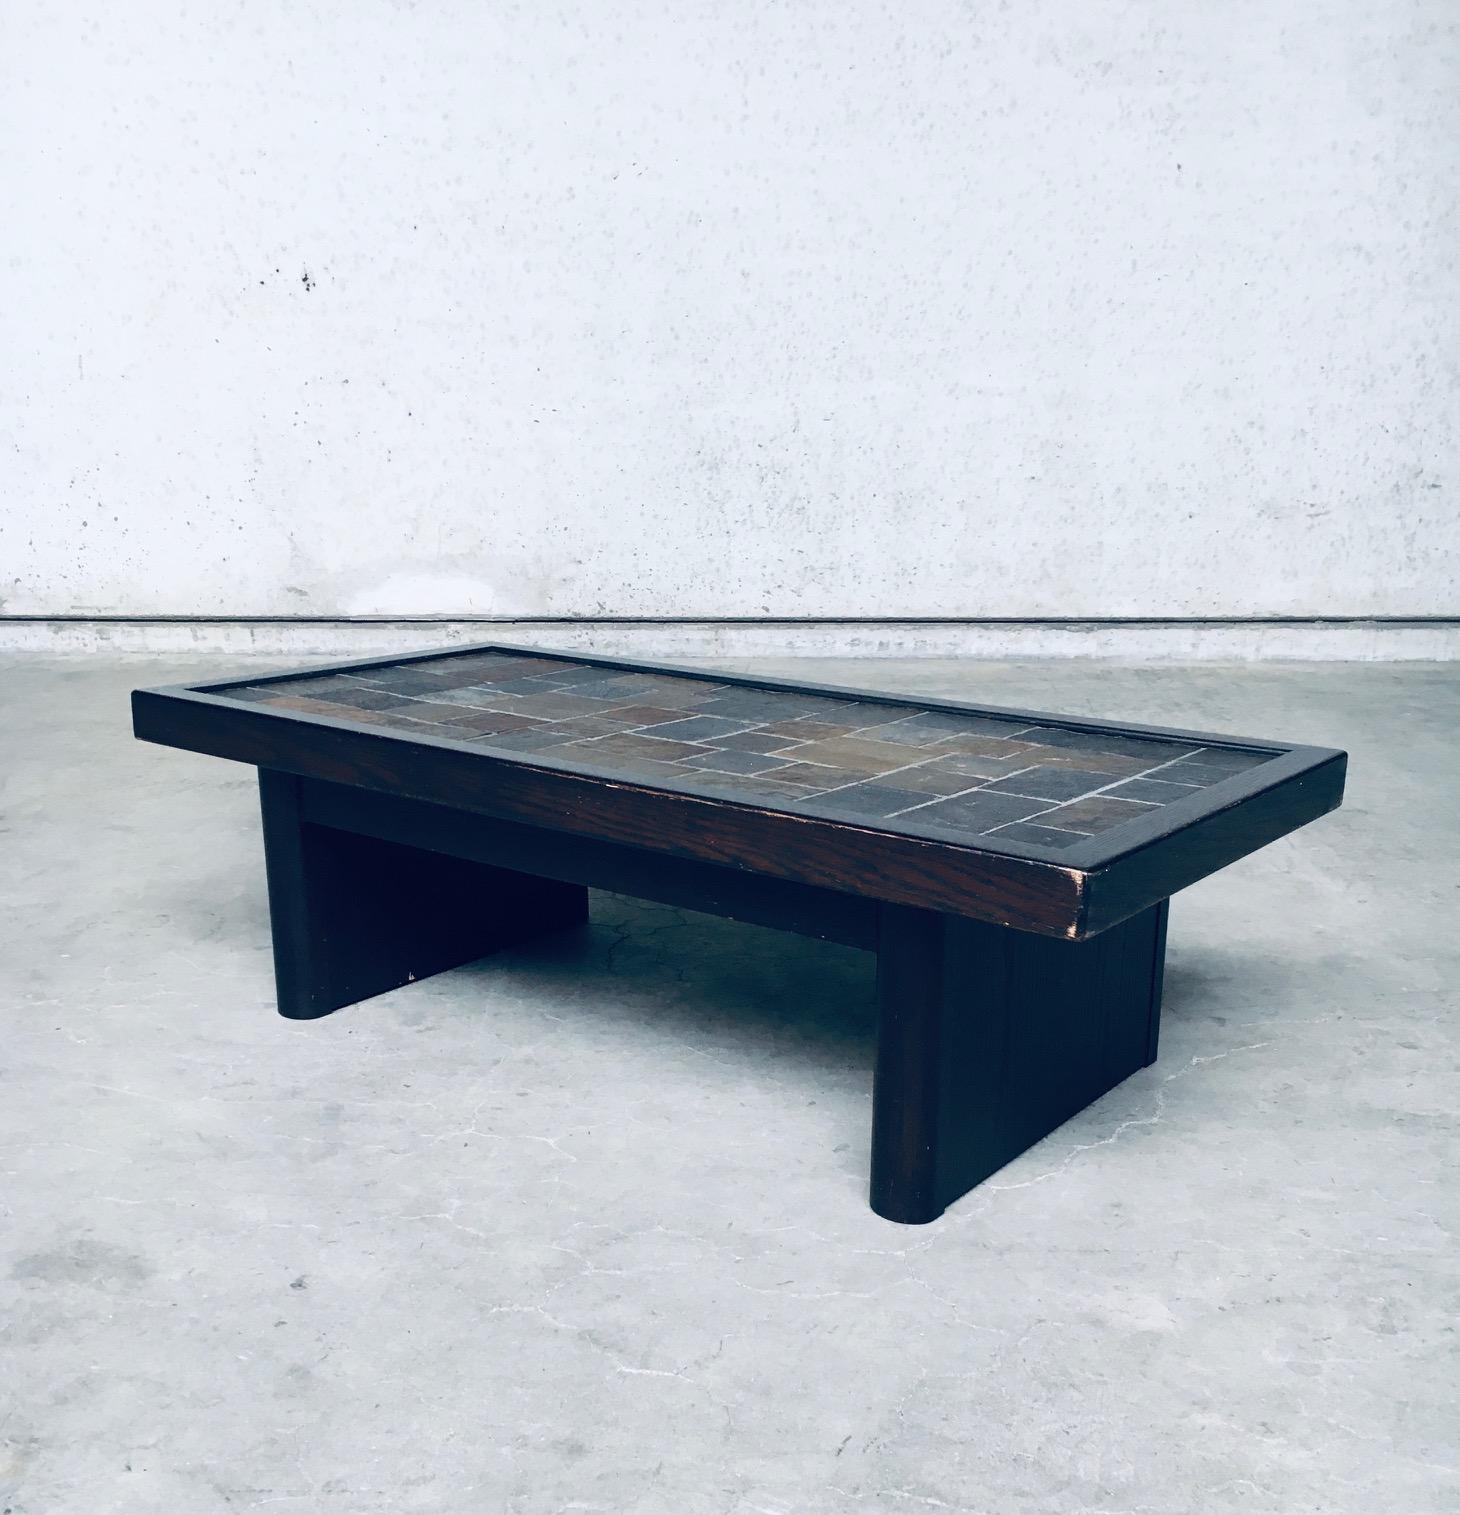 Vintage Brutalist Design Style Slate Tile inlay Coffee Table, made in Belgium 1970's. Dark stained oak wooden frame, and dark stained beech base. Mix of slate tiles in different colors. This comes in very good, all original condition. Measures 128cm